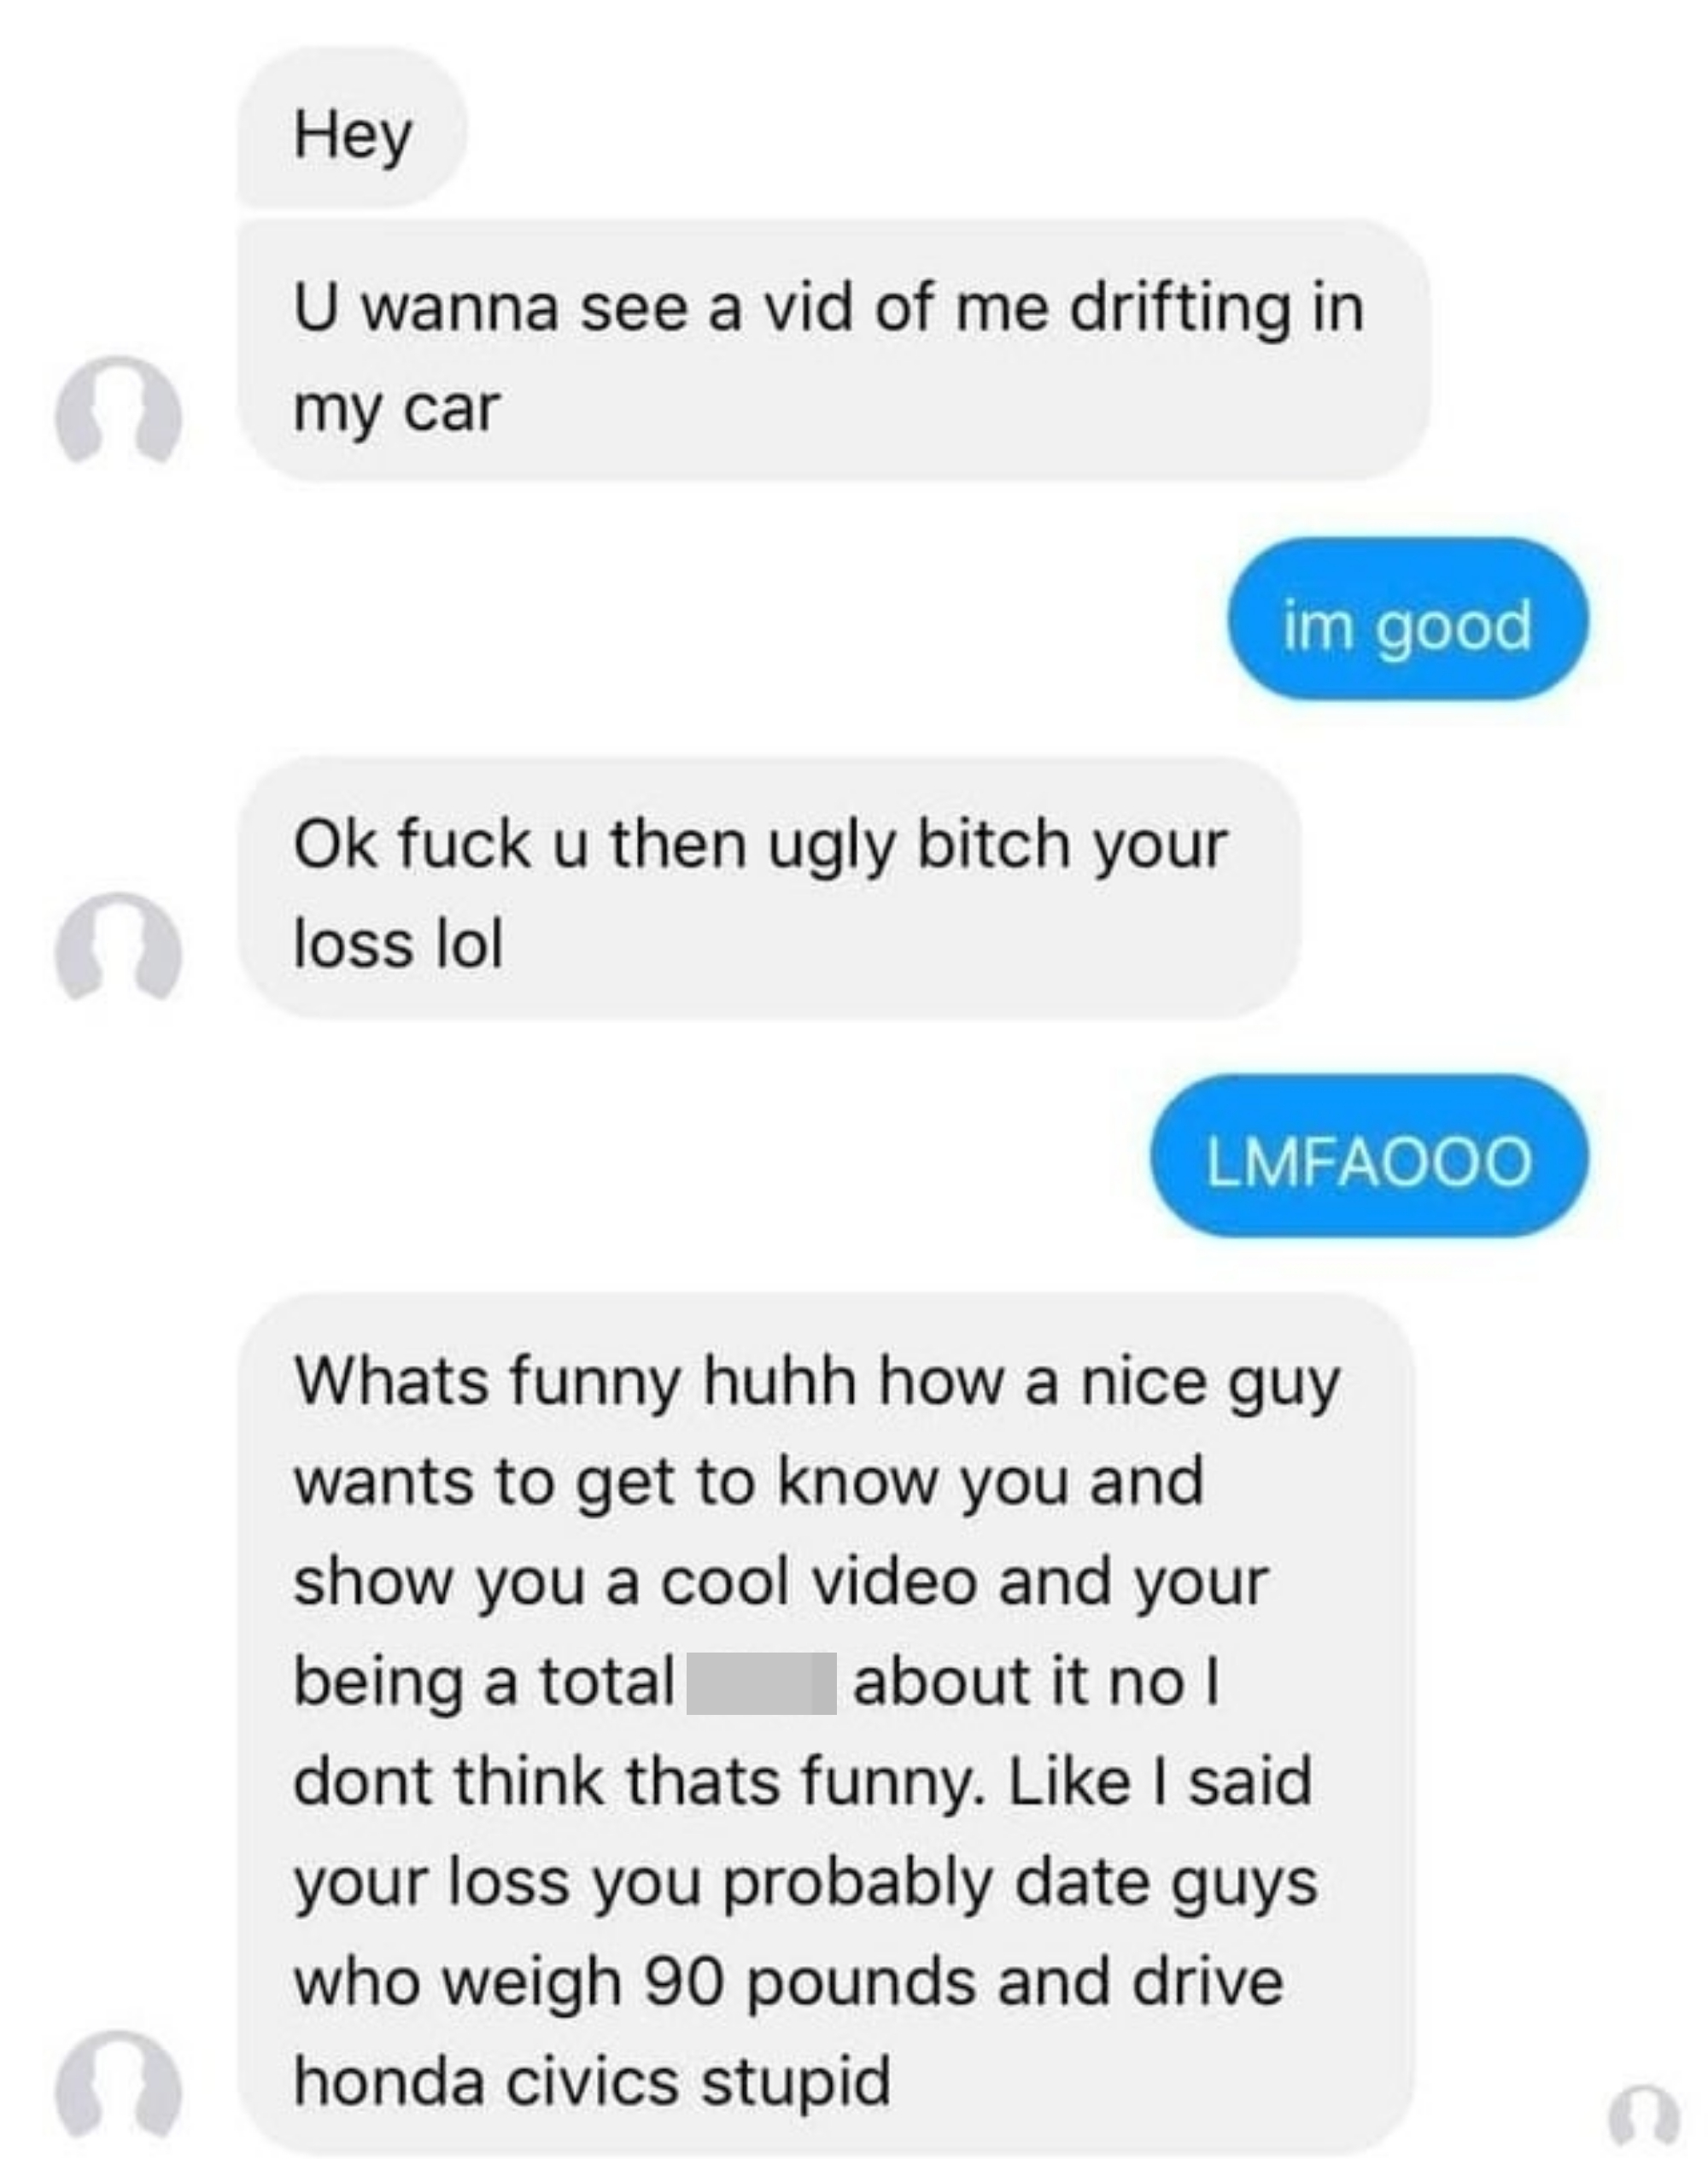 girl rejects a guy who wants to send her a video of him drifting